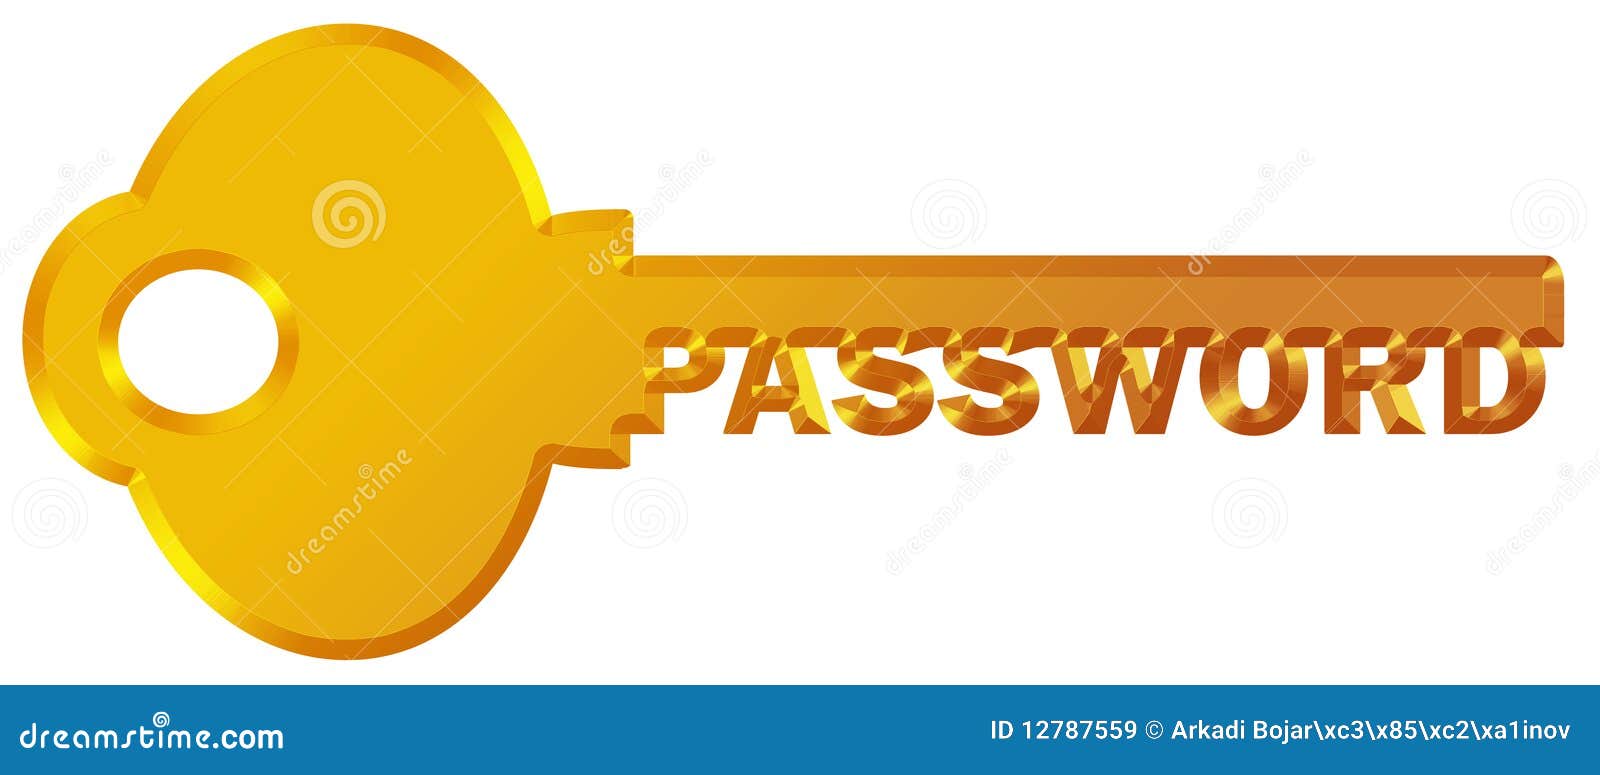 password protected